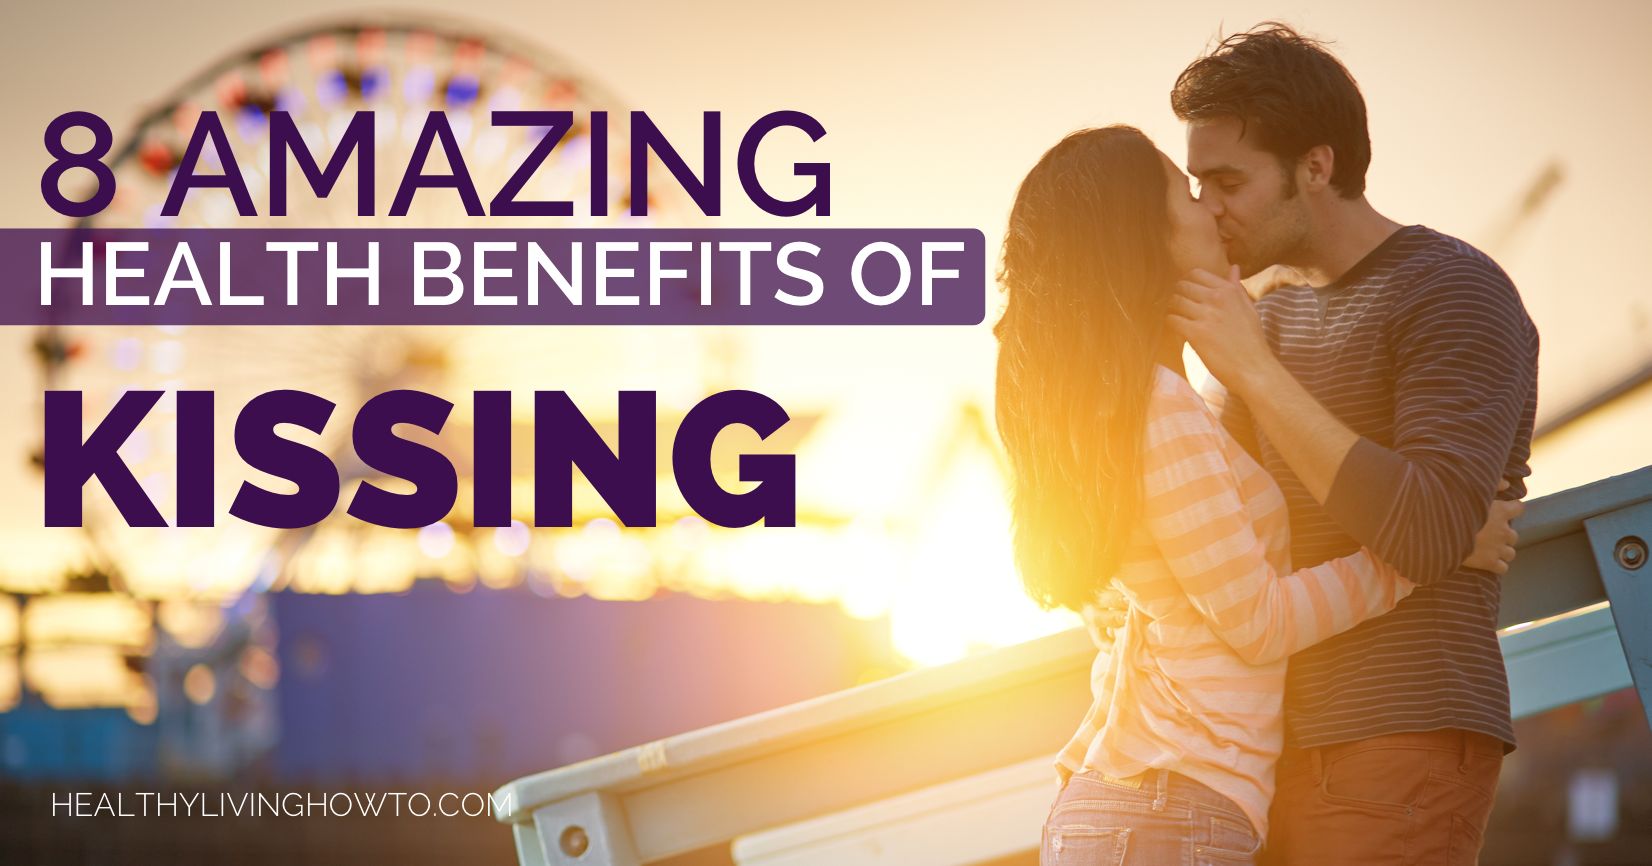 8 Amazing Health Benefits of Kissing | healthylivinghowto.com